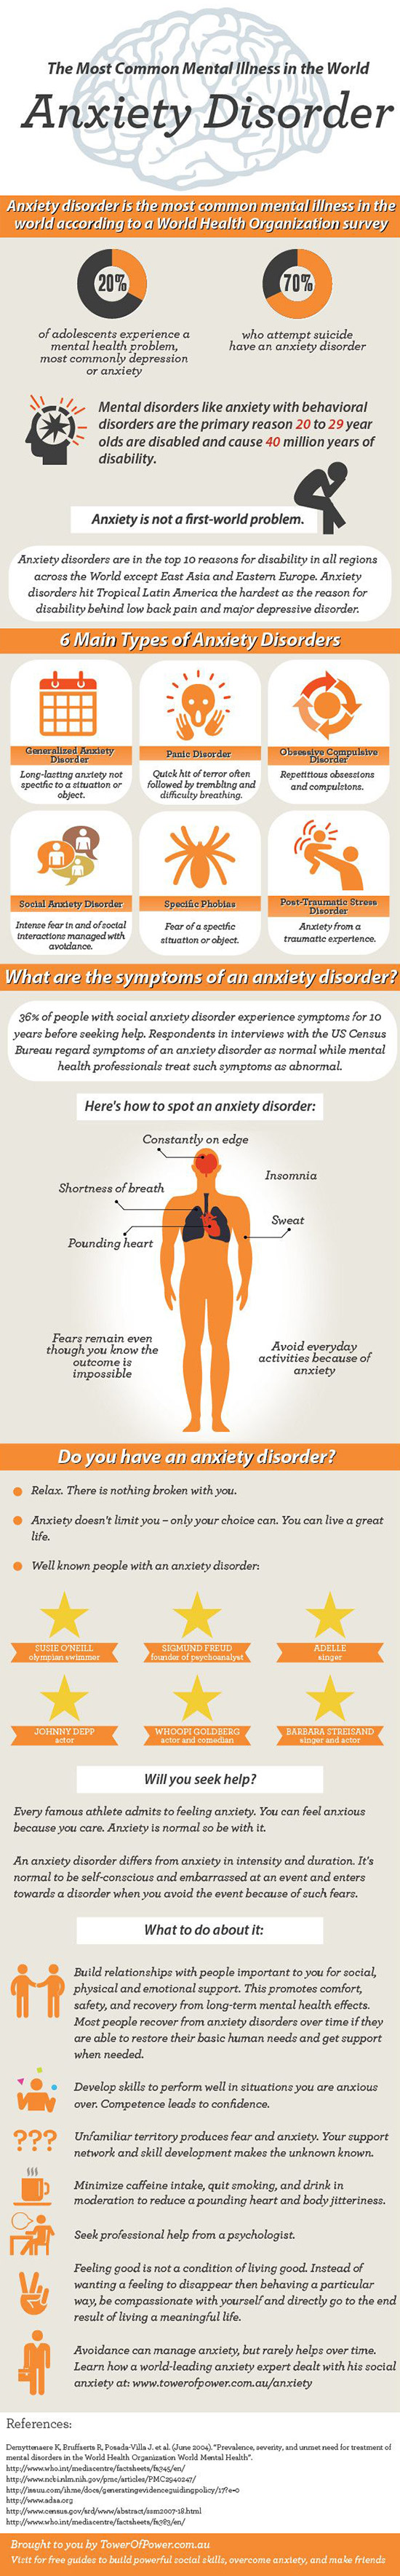 Anxiety Disorders Infographic